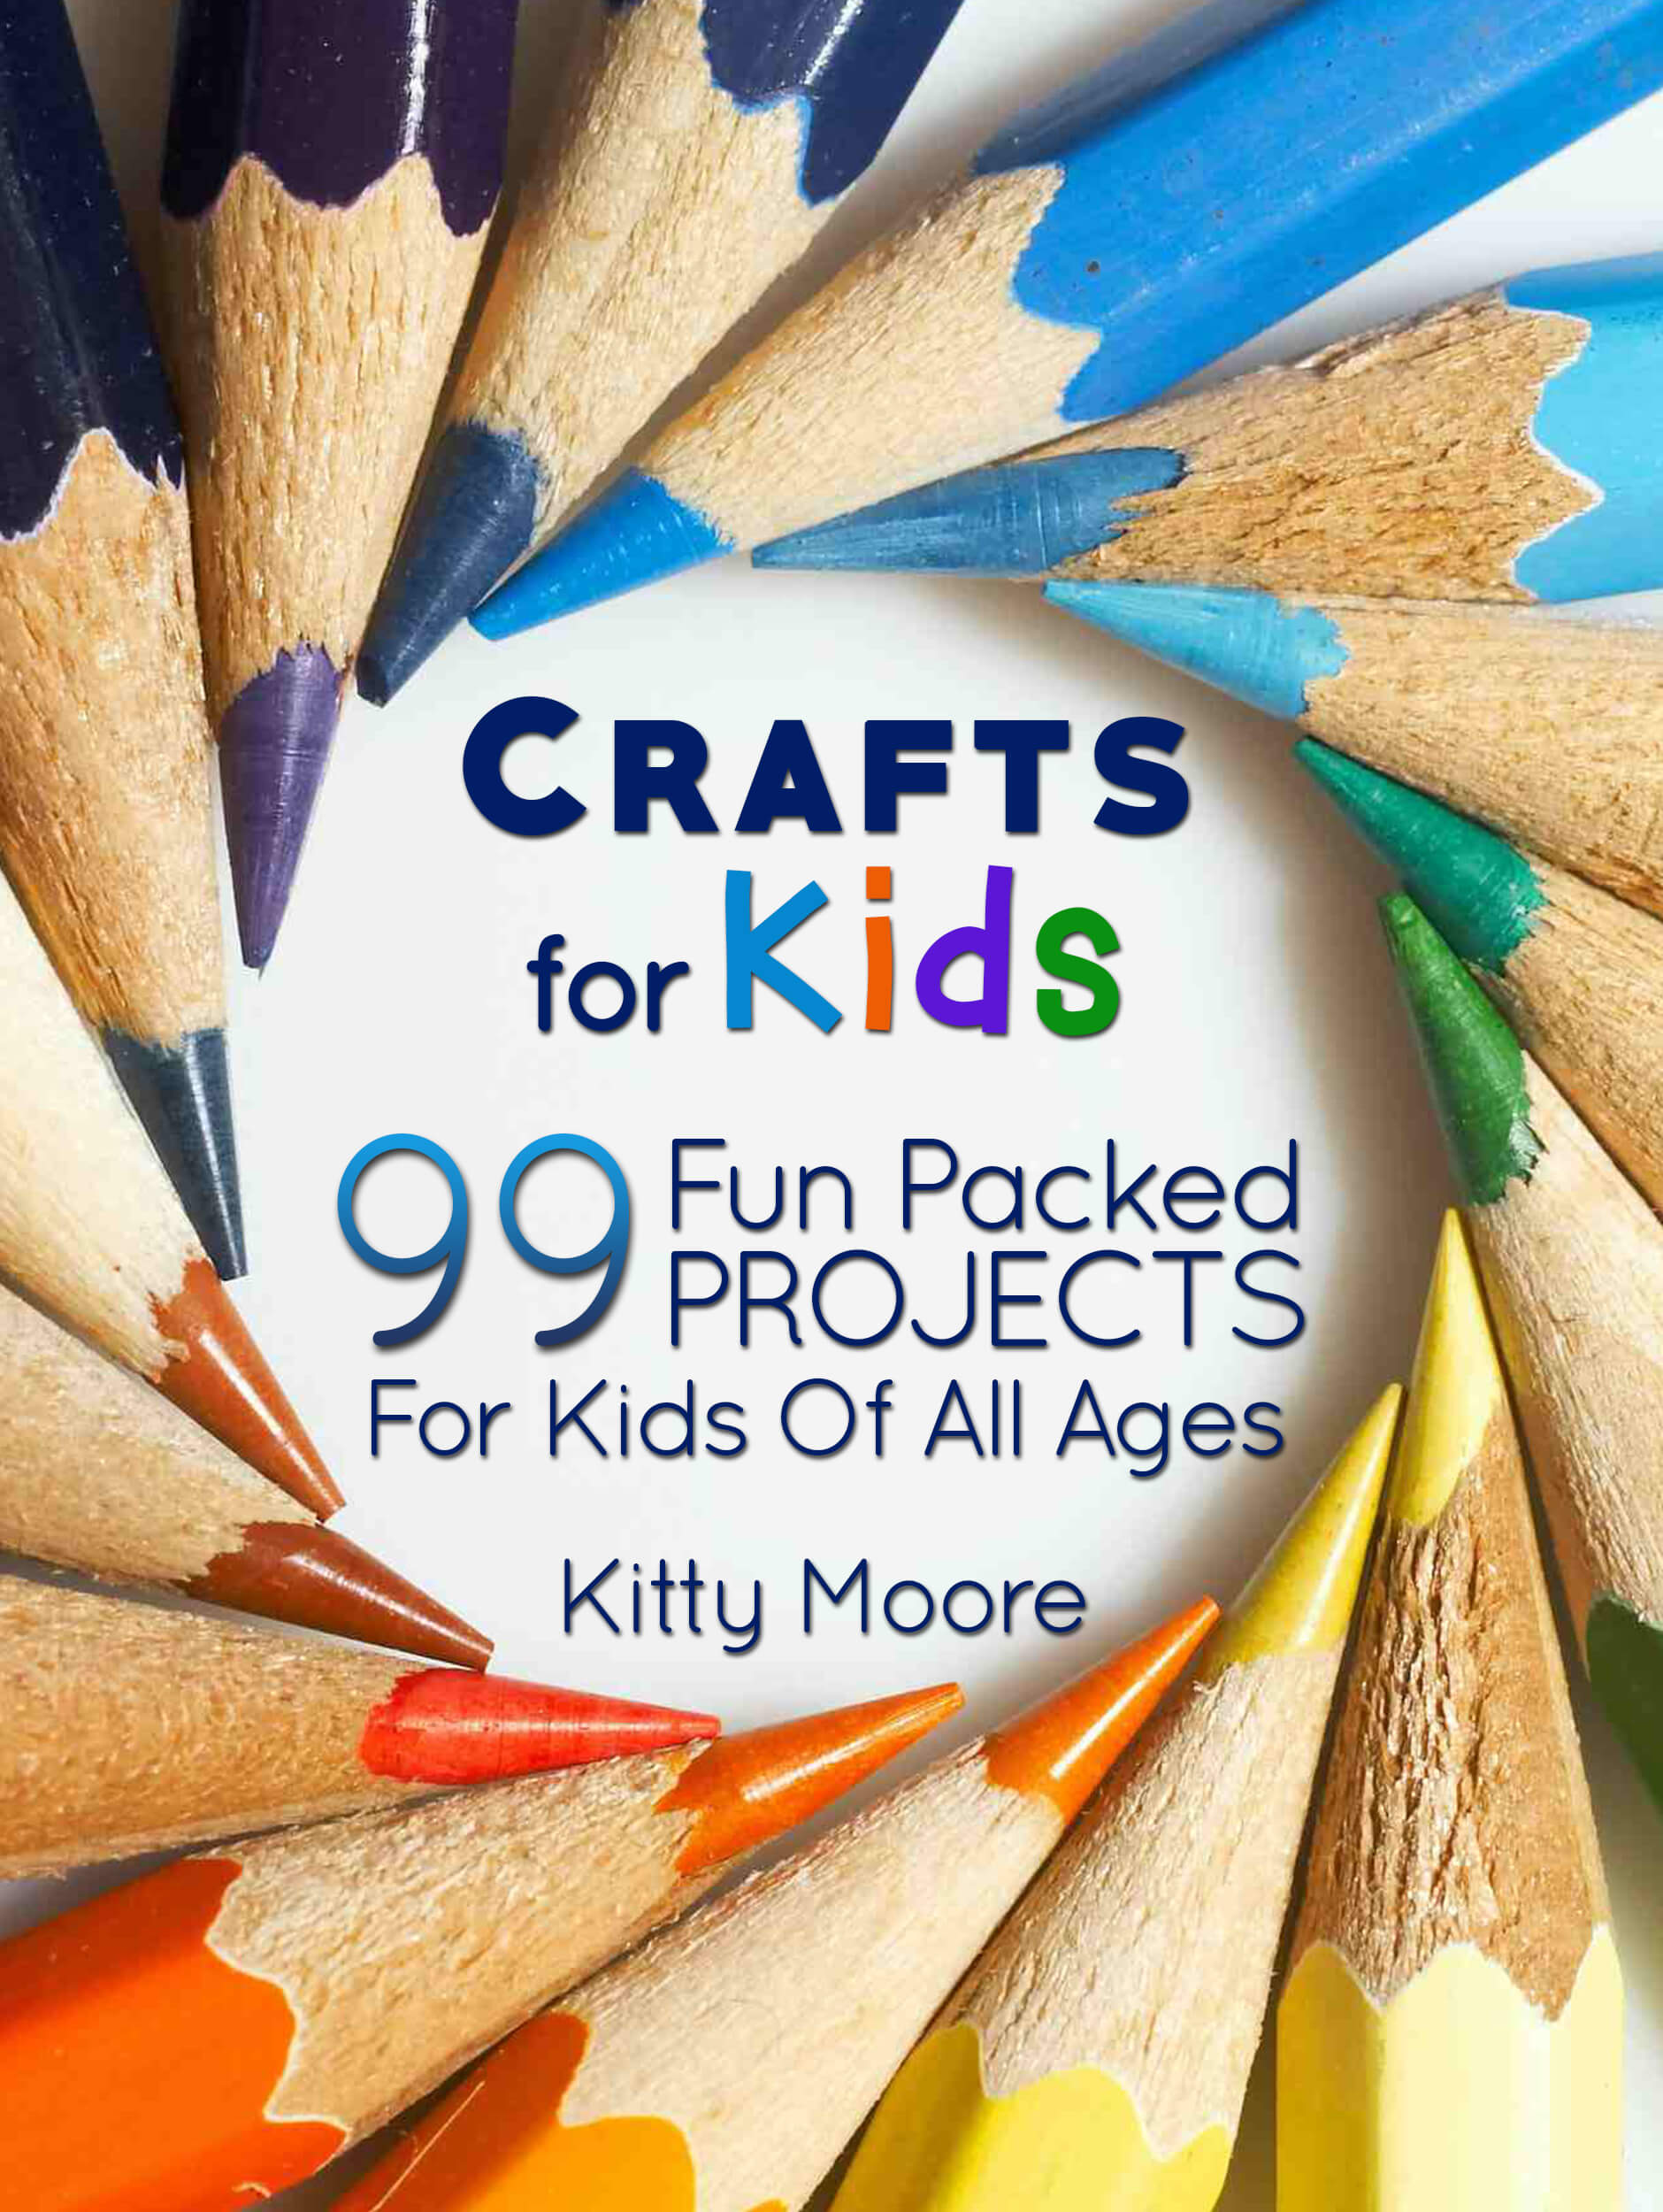 FREE: Crafts For Kids (3rd Edition): 99 Fun Packed Projects For Kids Of All Ages! (Kids Crafts) by Kitty Moore